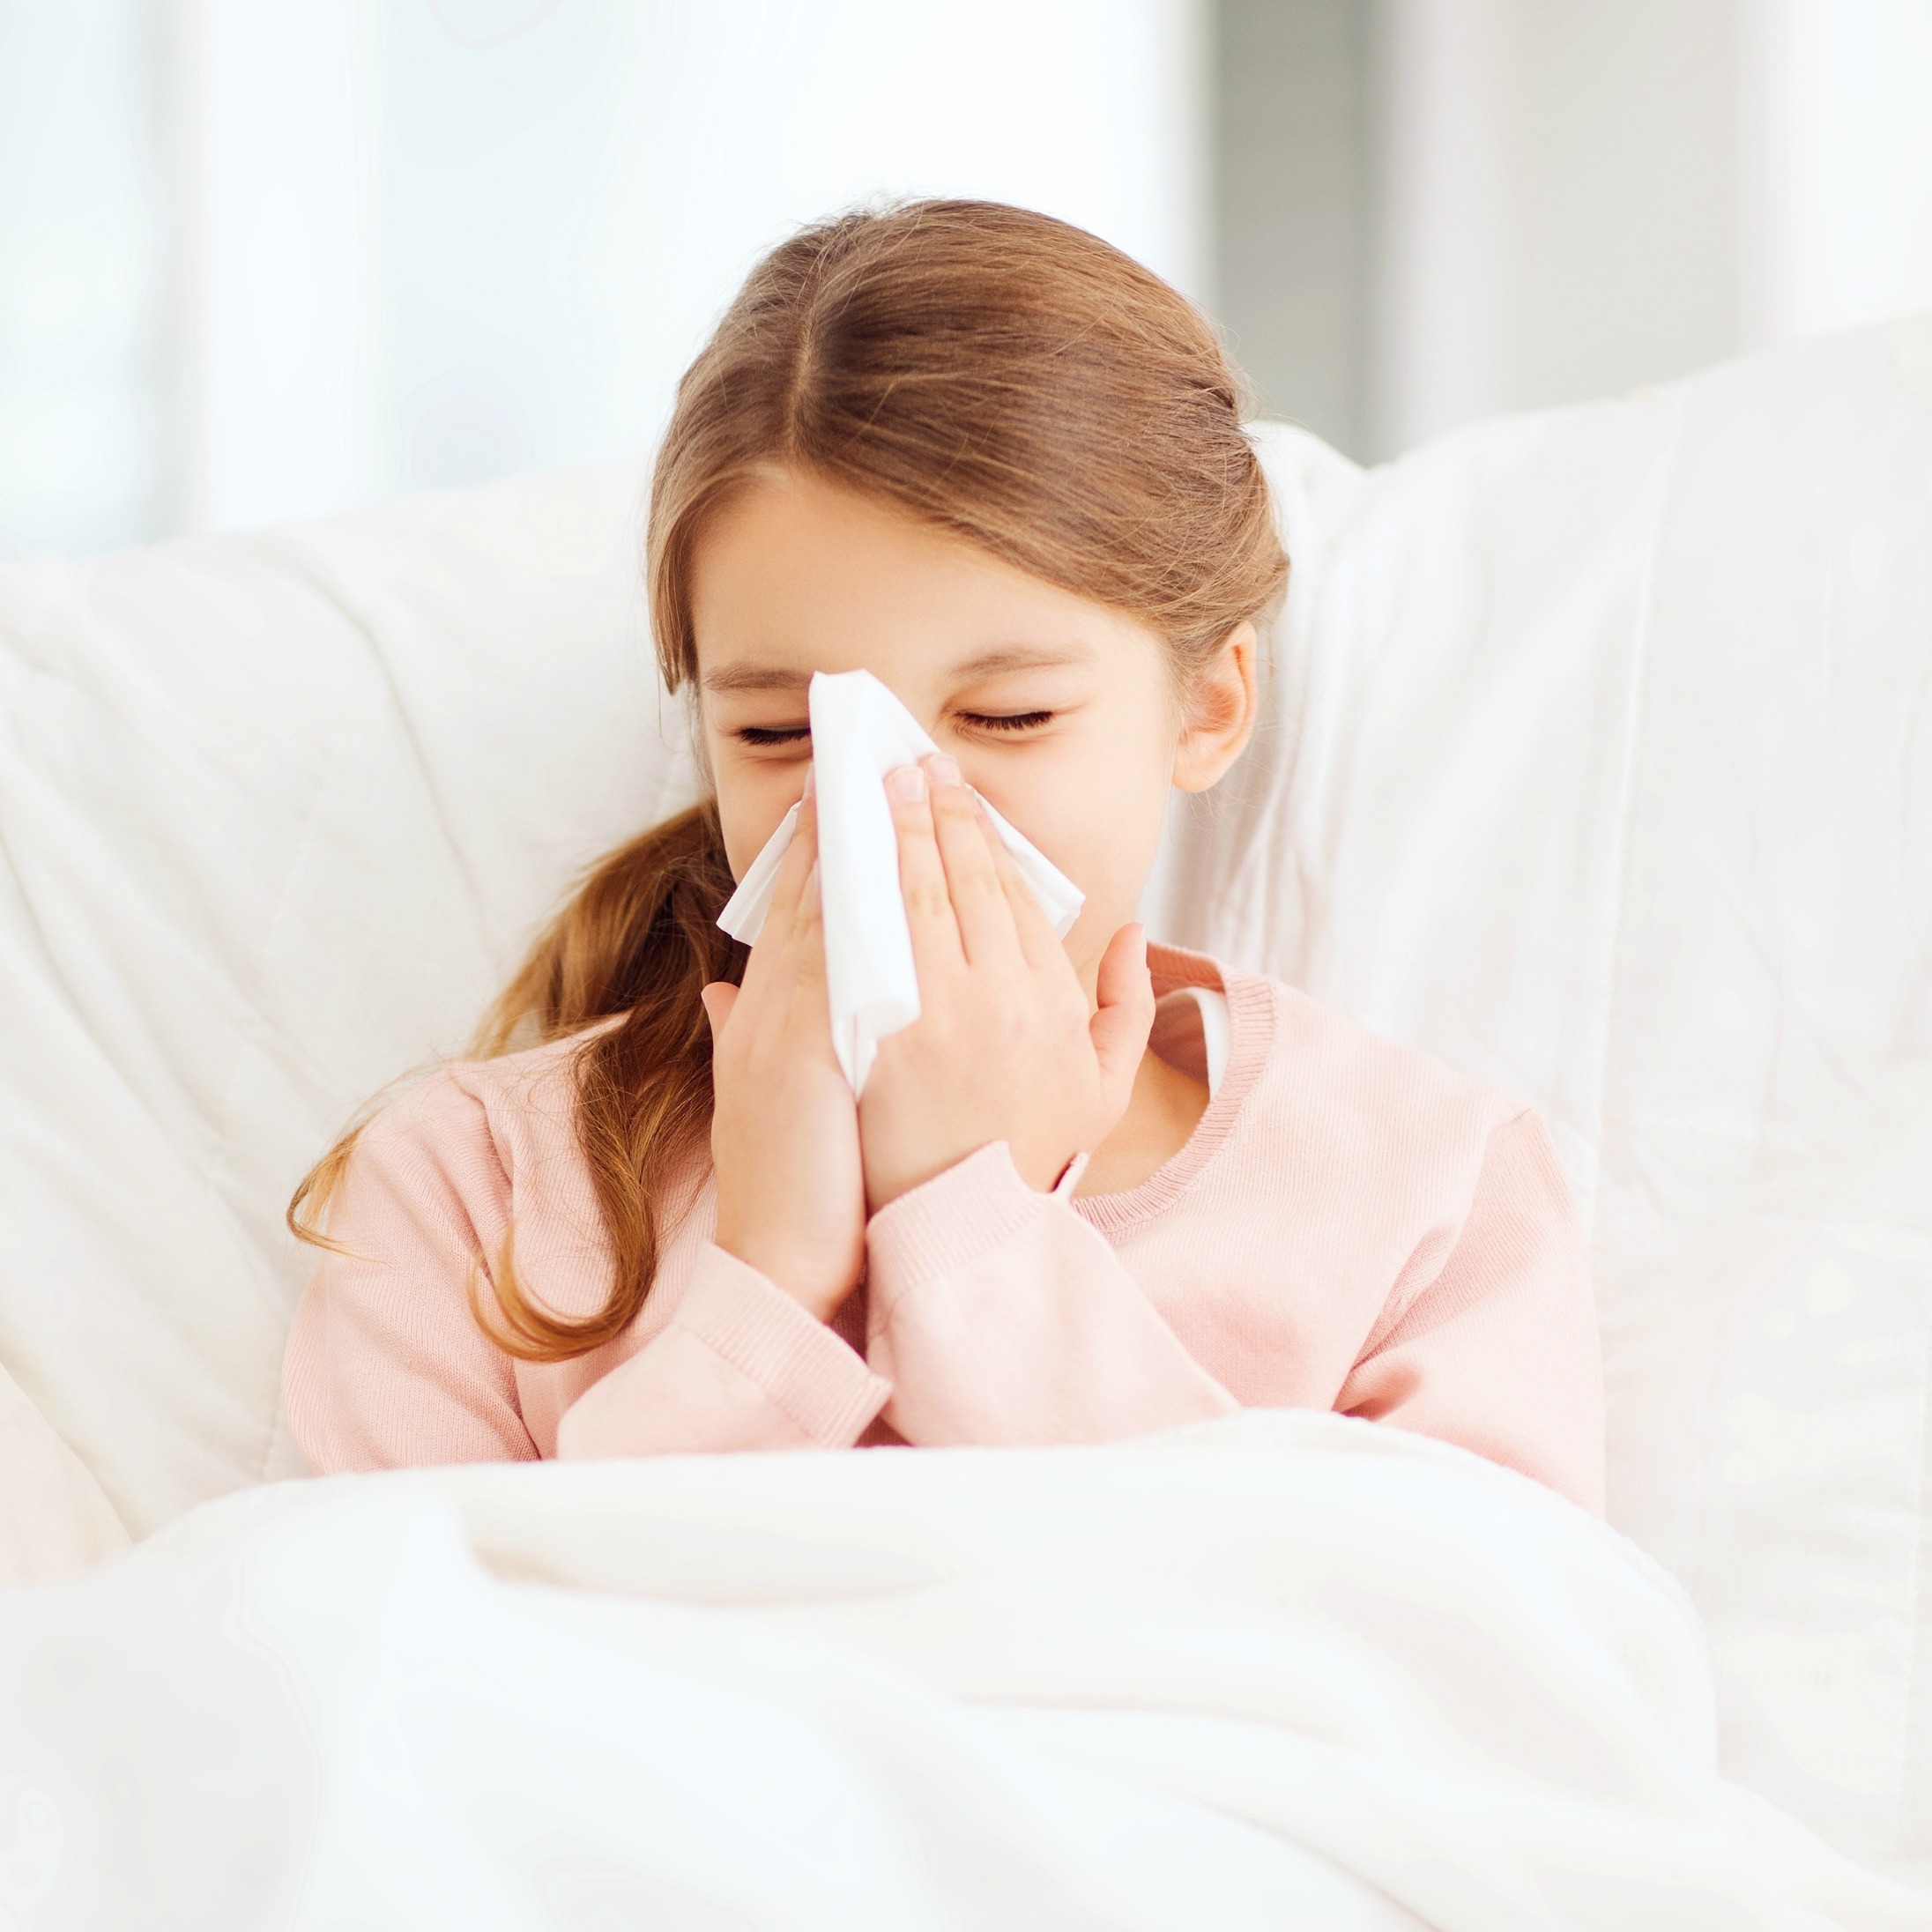 4 Tricks to Soothe a Sick Child That Every Mom Should Know